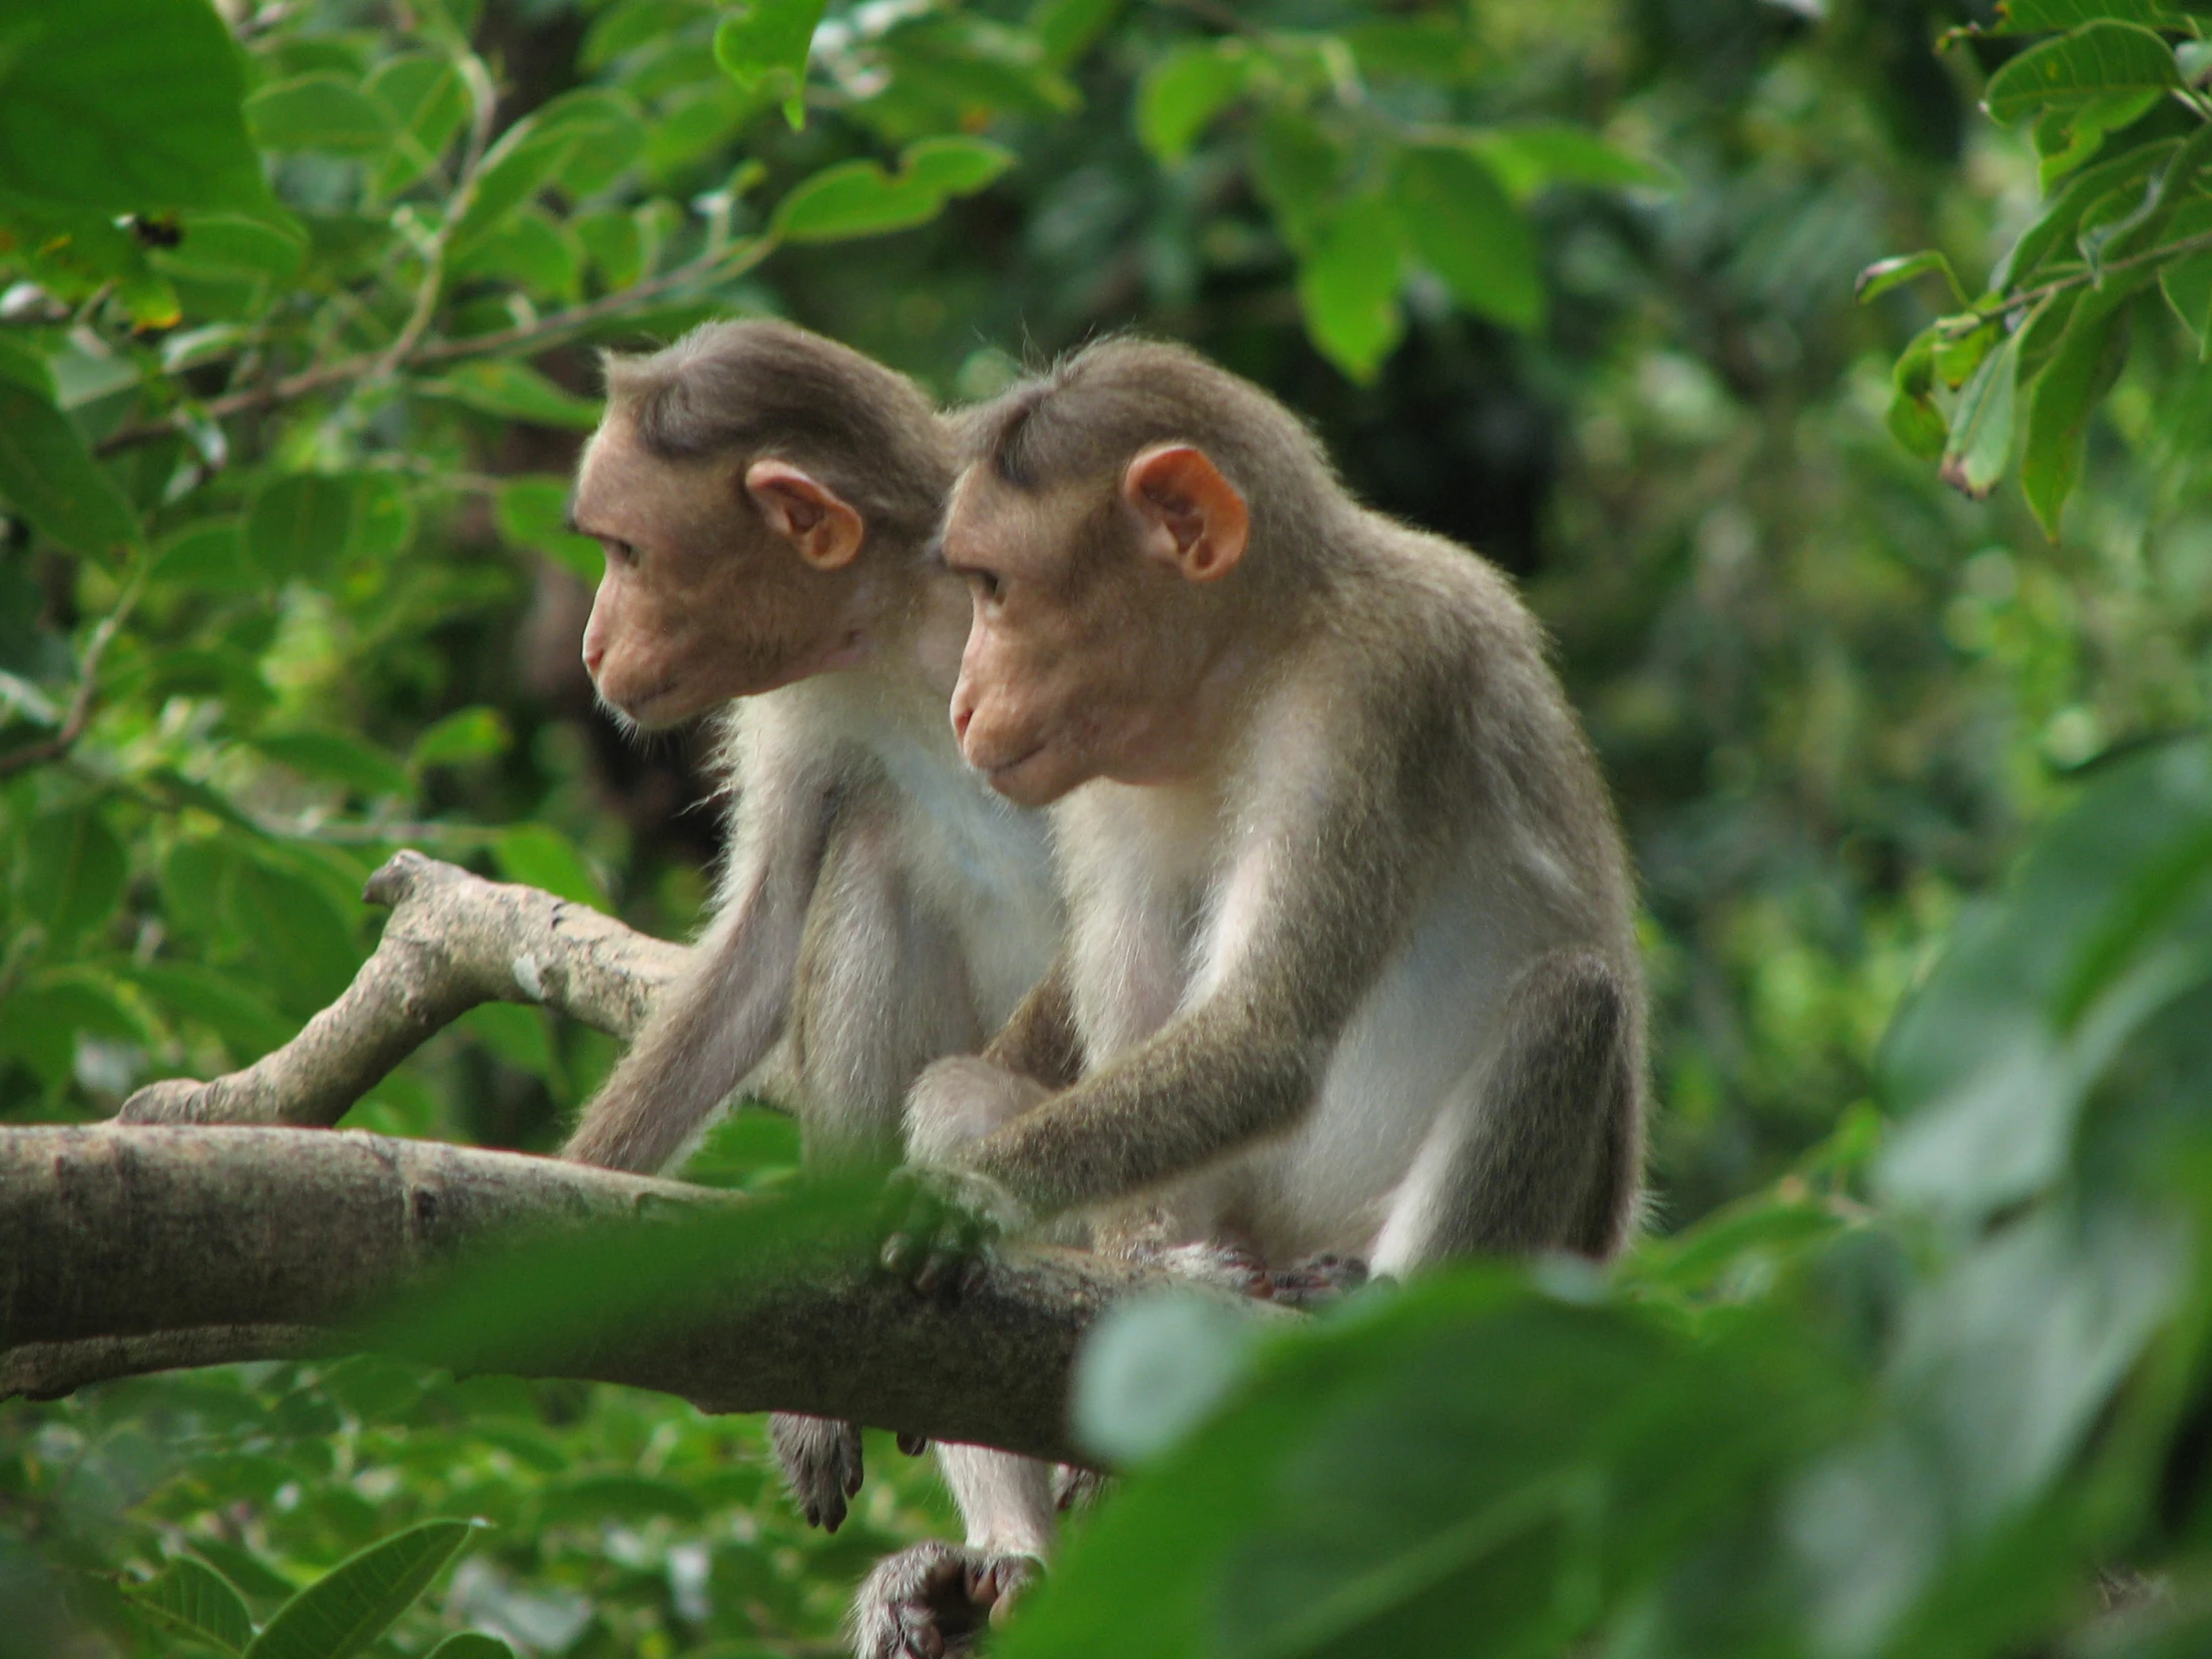 two monkeys sitting in the nches of a tree